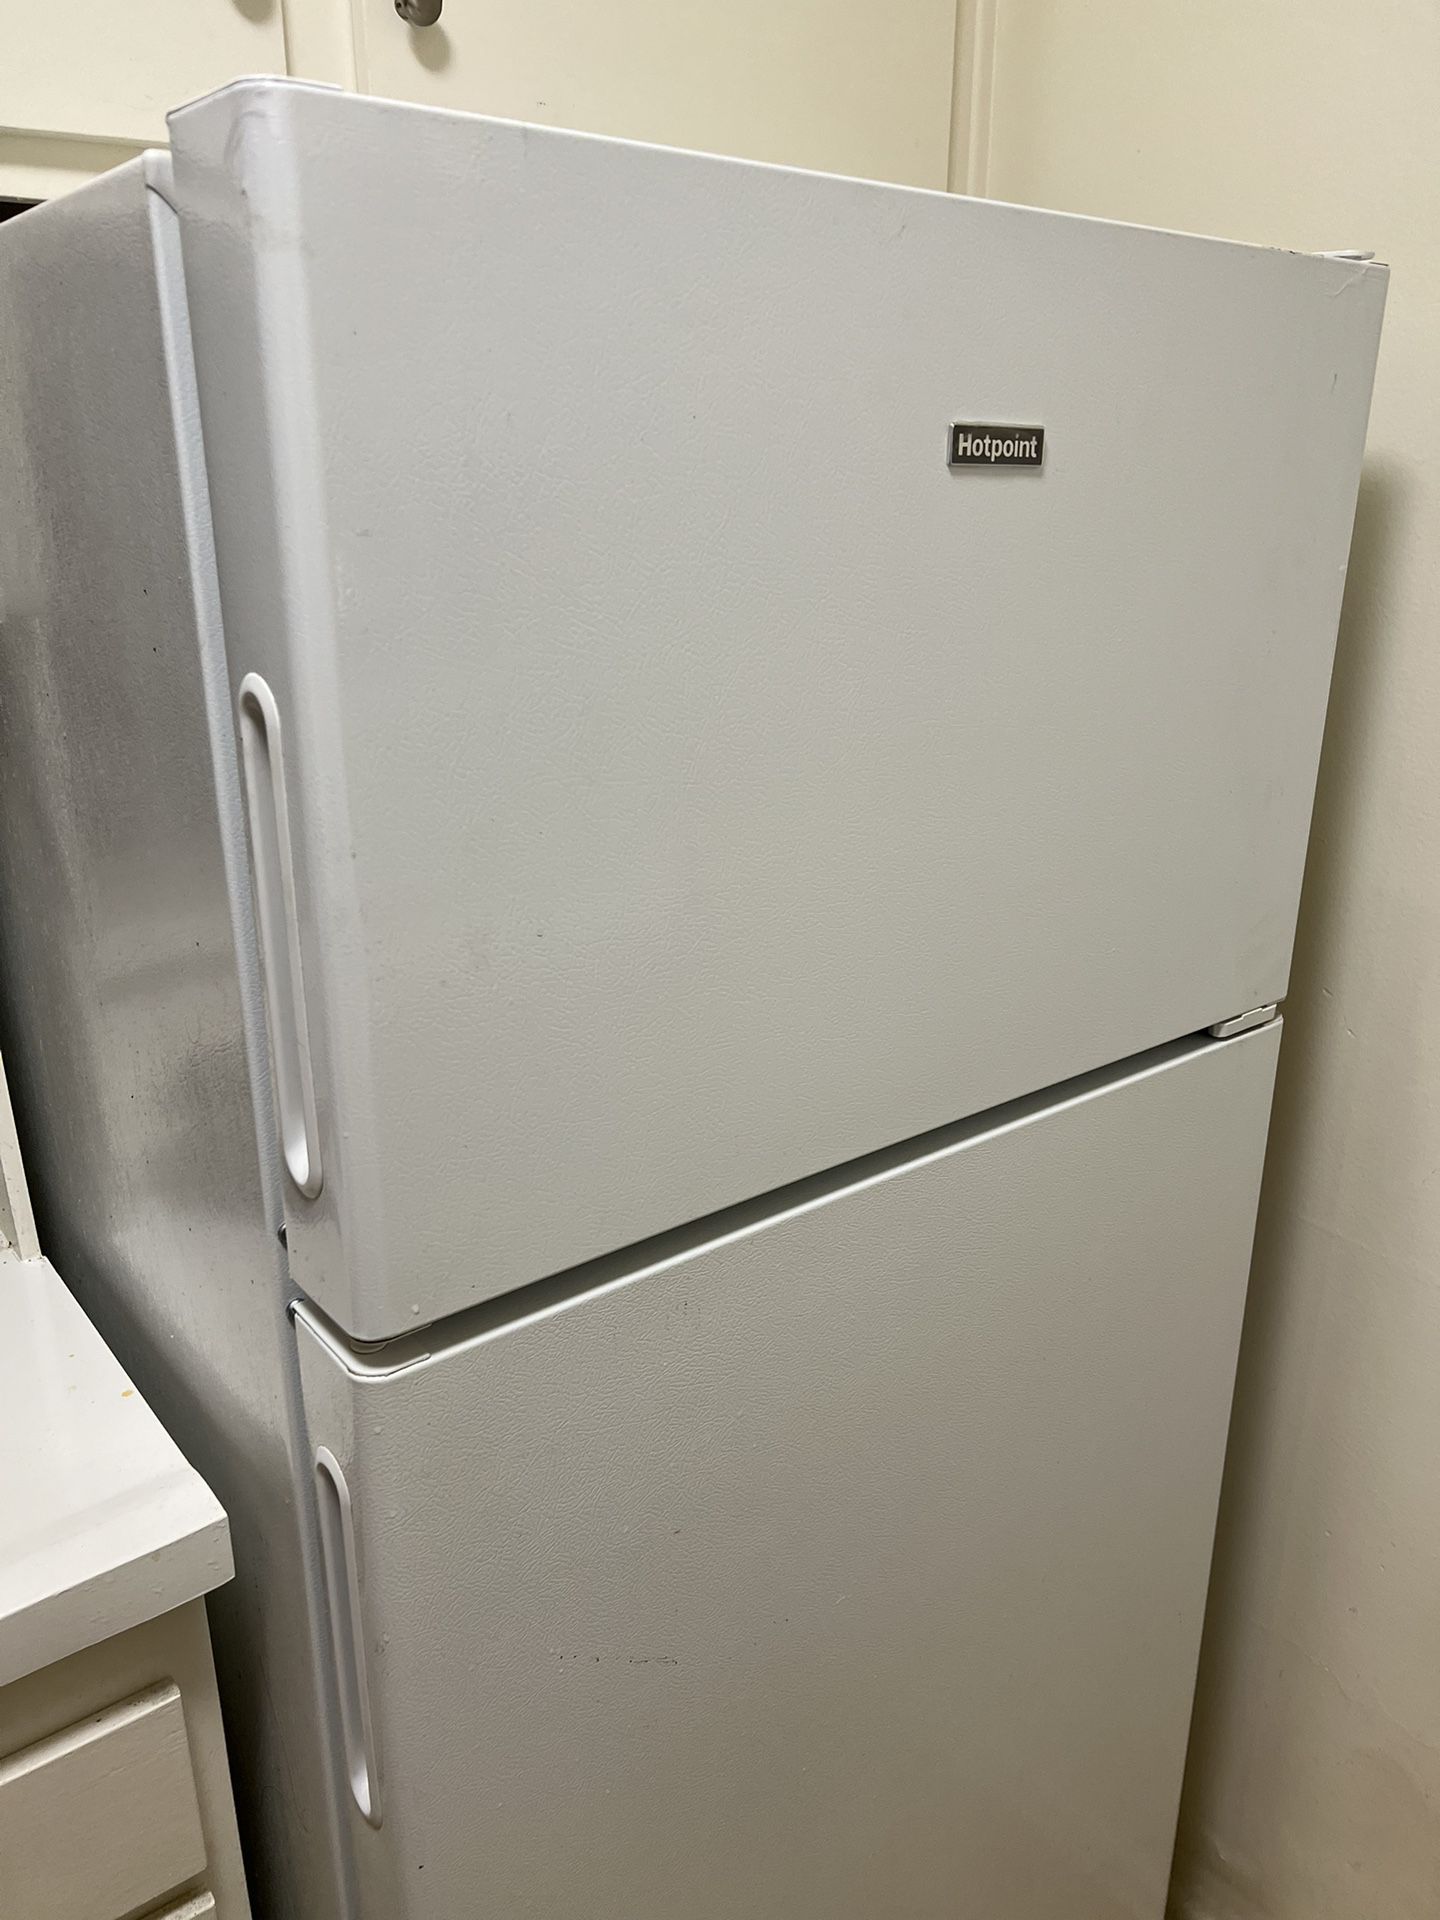 Hotpoint 15.6 cu. ft. Top Freezer Refrigerator in White, ENERGY STAR